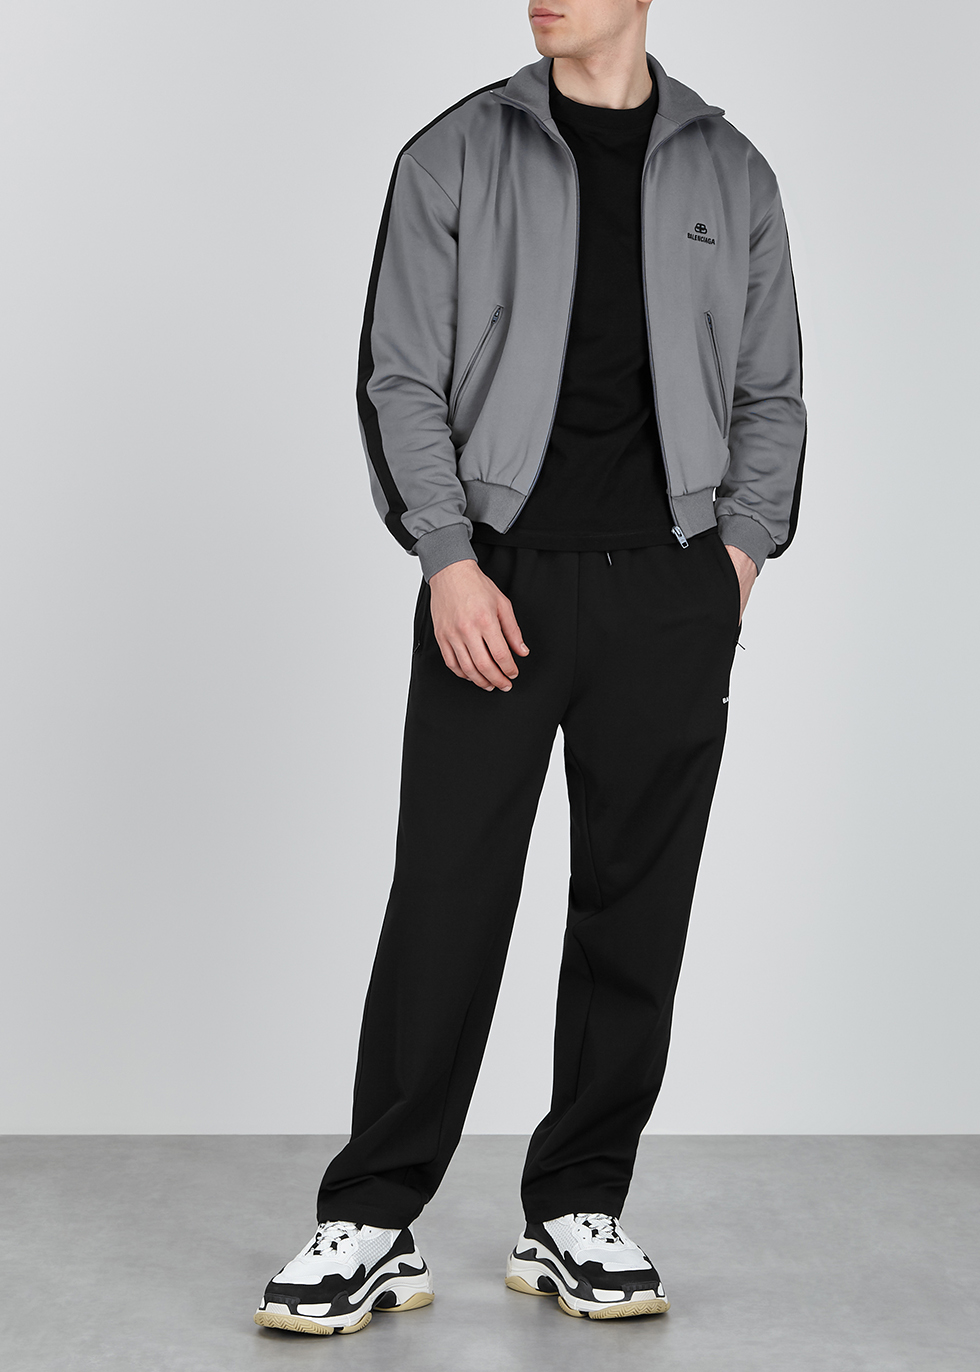 Buy Balenciaga Track Pants Products for Men in Malaysia